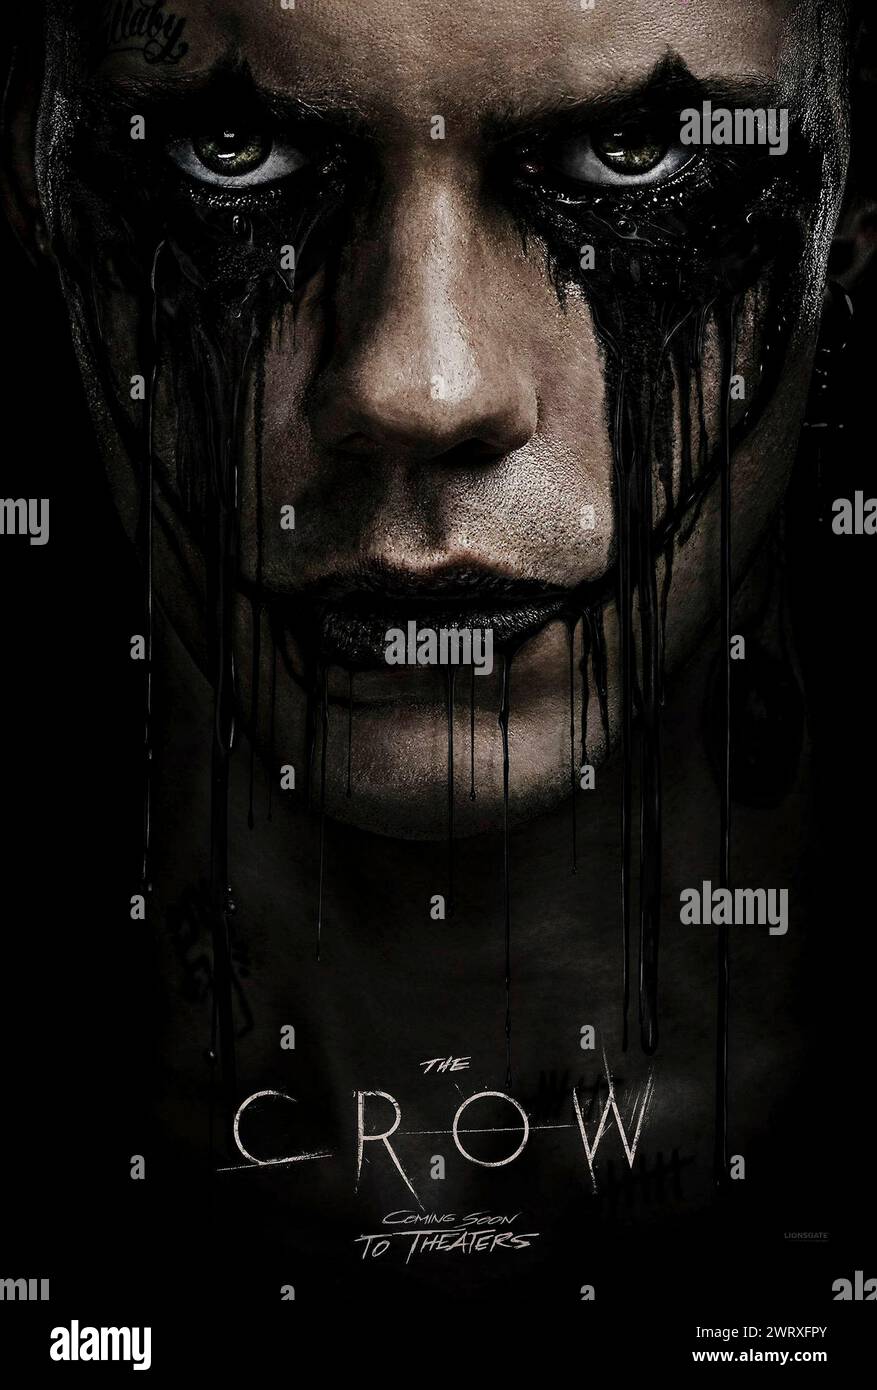 The Crow (2024) directed by Rupert Sanders and starring Bill Skarsgård, Danny Huston and FKA twigs. Soulmates Eric Draven and Shelly Webster are brutally murdered. Given the chance to save his true love by sacrificing himself, Eric sets out to seek revenge, traversing the worlds of the living and the dead to put the wrong things right. US advance poster.***EDITORIAL USE ONLY*** Credit: BFA / Lionsgate Stock Photo